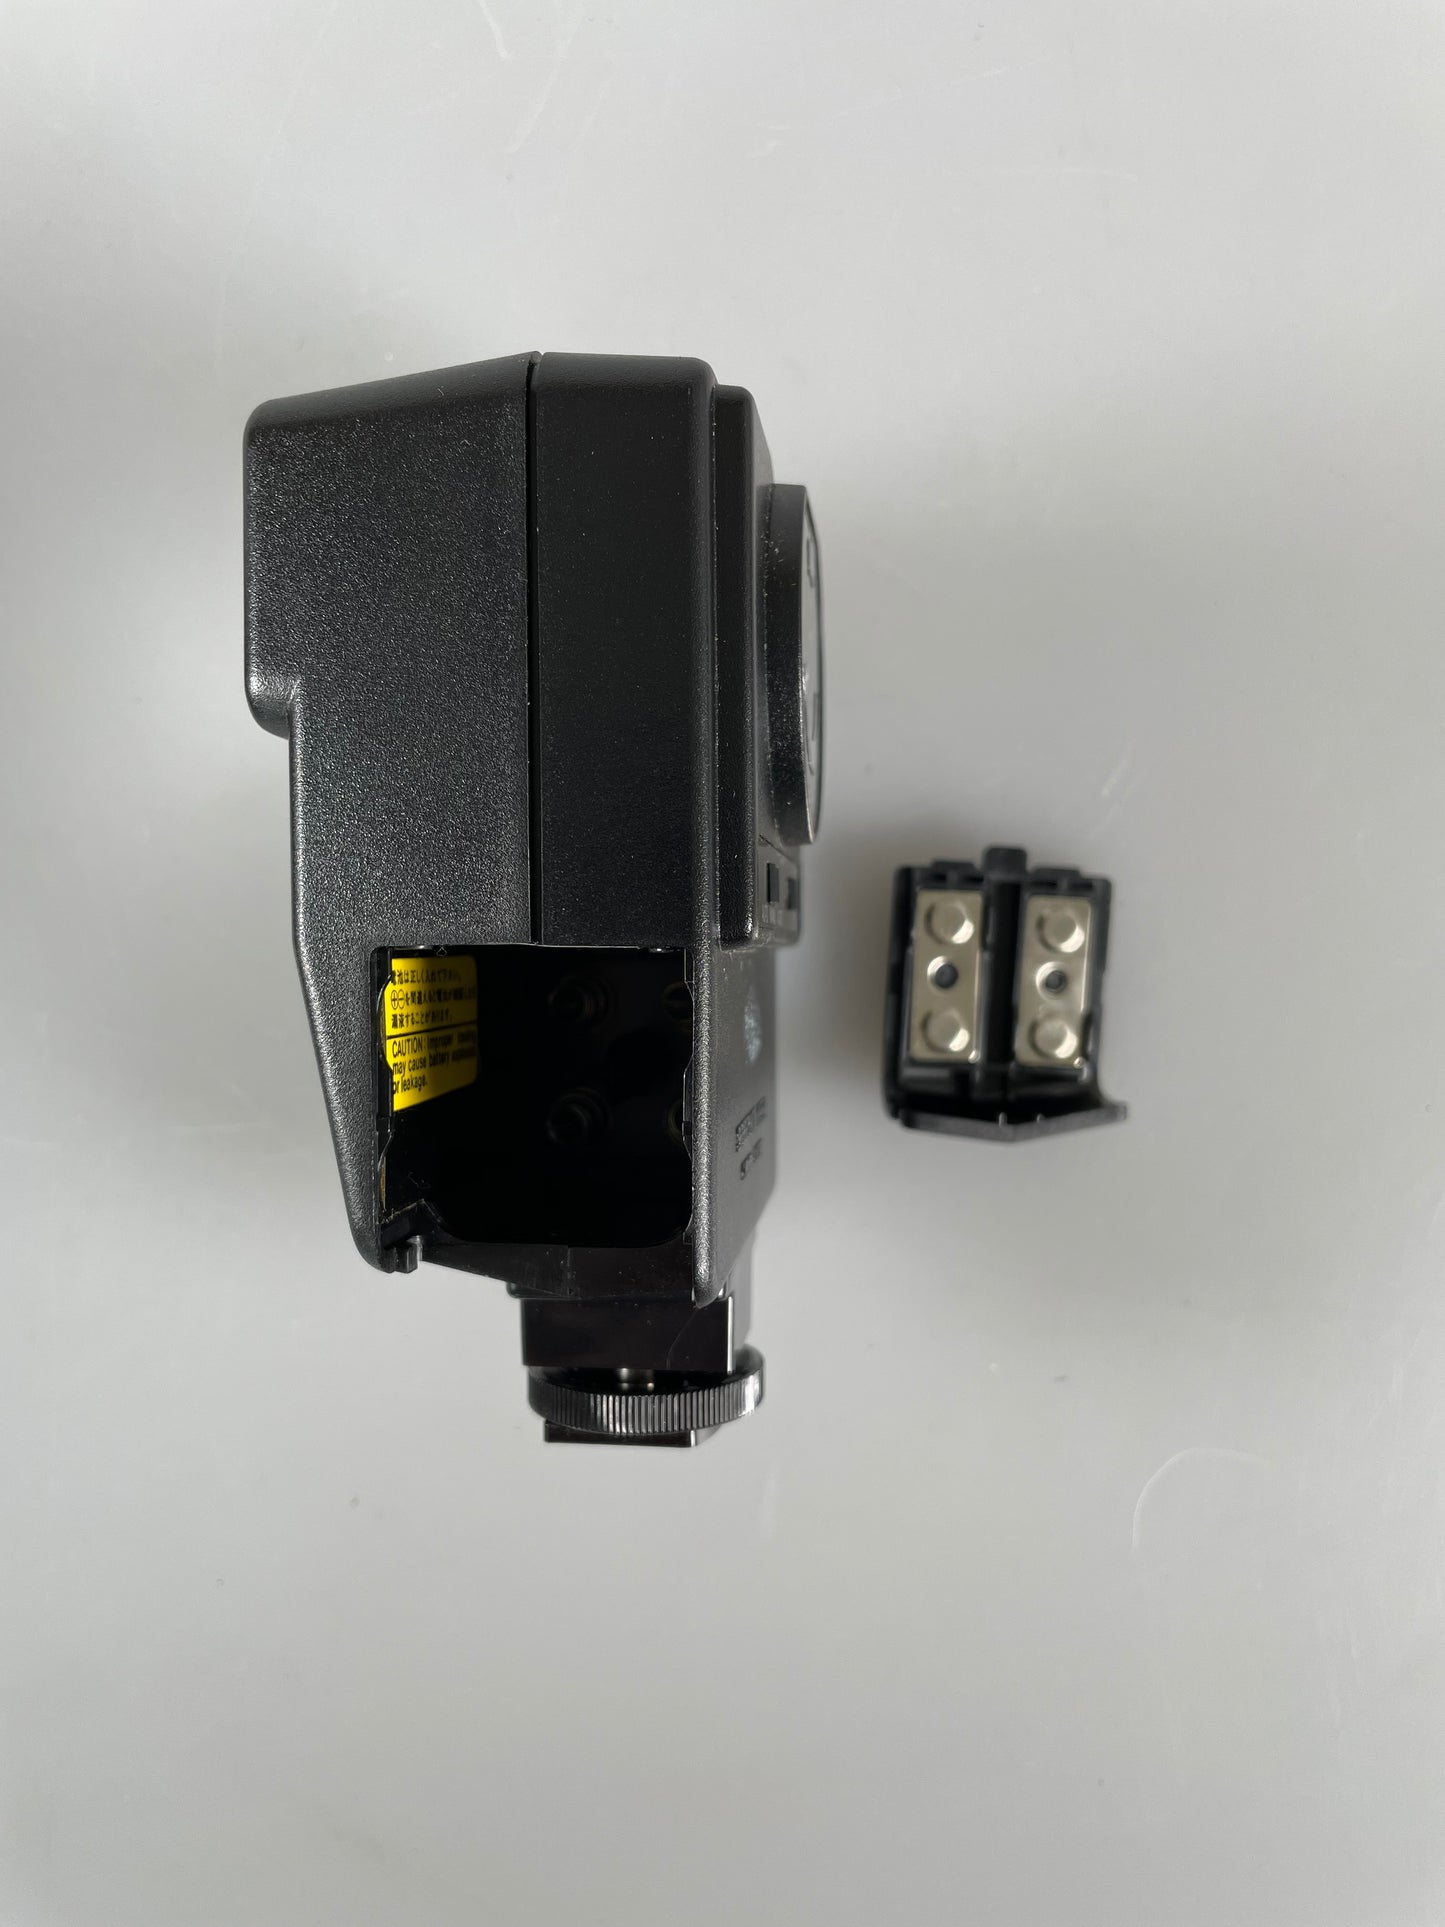 Canon Speed Light Flash 155A Shoe Mount for Canon A1 Ae1 AV1